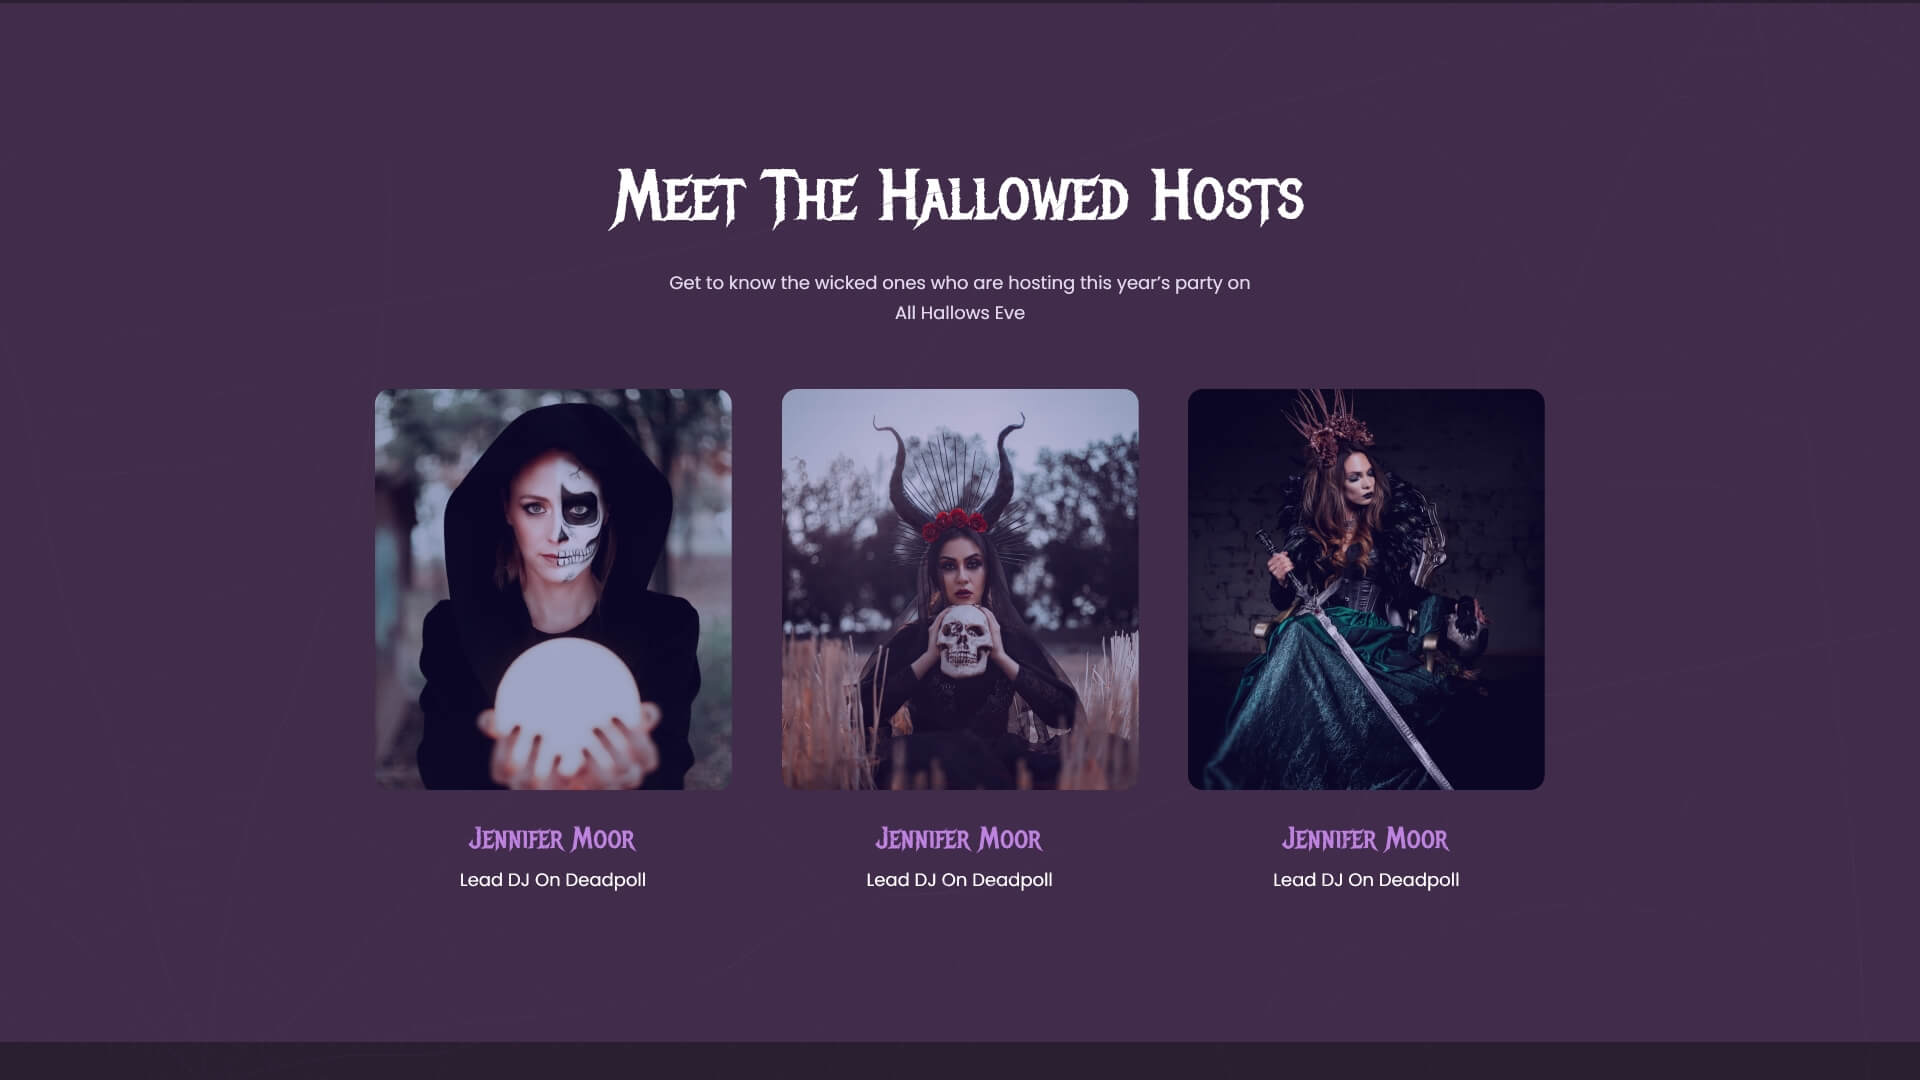 How To Create A Spooky Halloween Website With 1 Click Using Elementor Ready Template [Freebies] 2